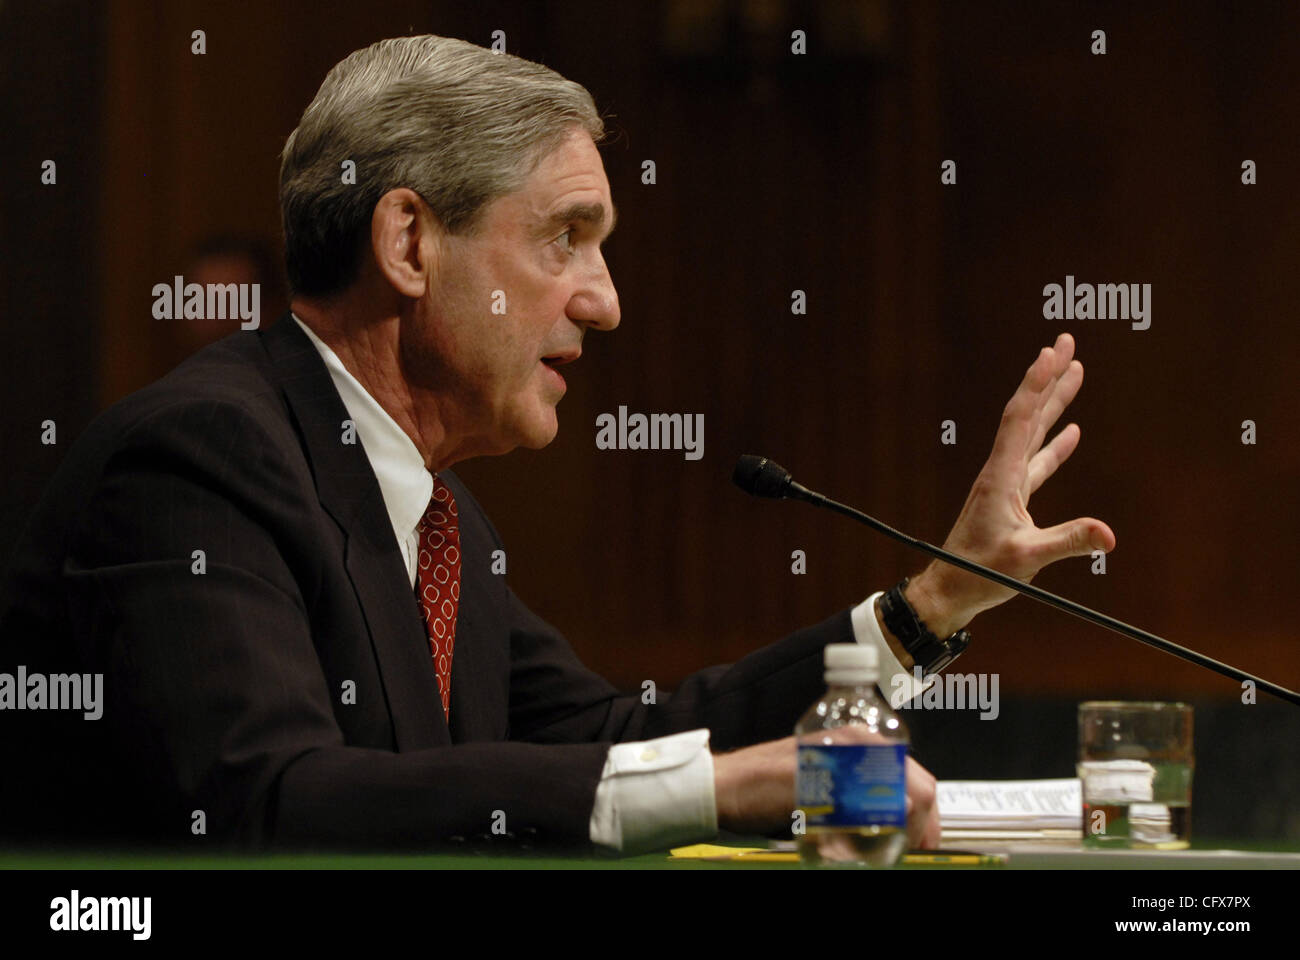 Mar 27, 2007 - Washington, DC, USA - ROBERT MUELLER, director of the FBI testifies before the Senate Judiciary committee during an oversight hearing. Many members of the committee peppered Mueller with questions regarding the recently reported misuses of the USA Patriot Act and the firings of US Att Stock Photo